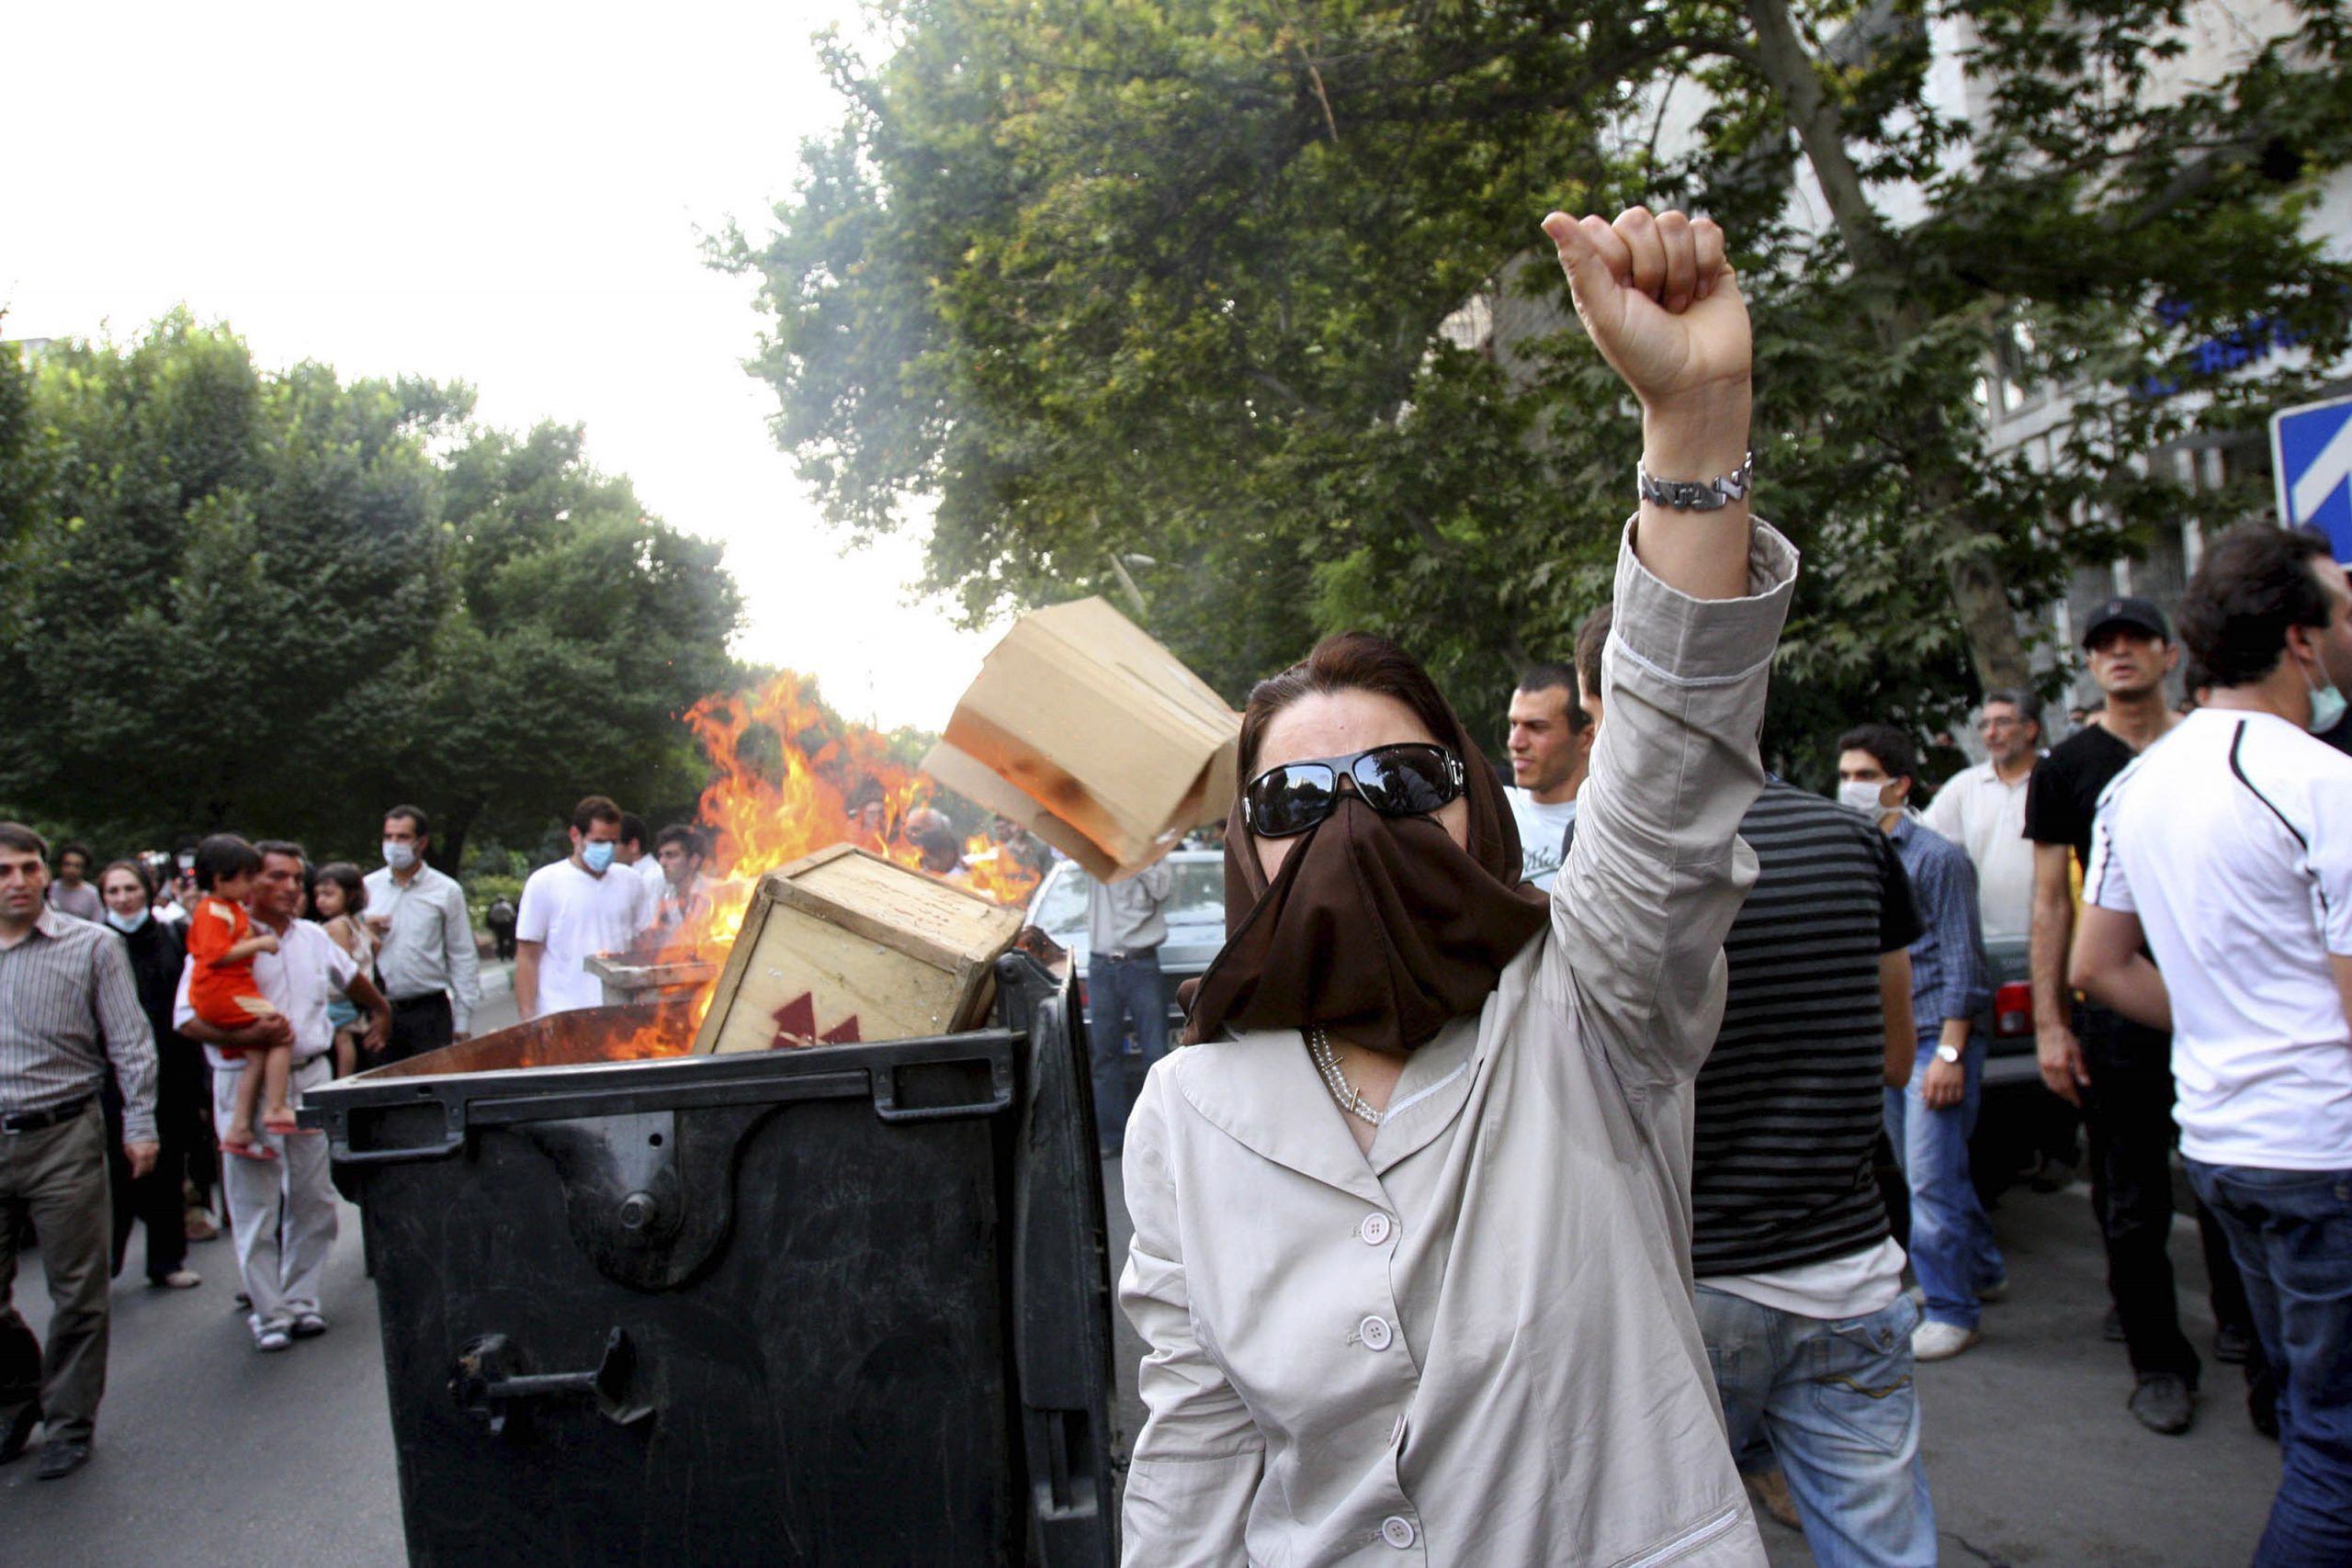 2009-07-09T120000Z_983124263_GM1E57A097Y01_RTRMADP_3_IRAN-PROTESTS-scaled